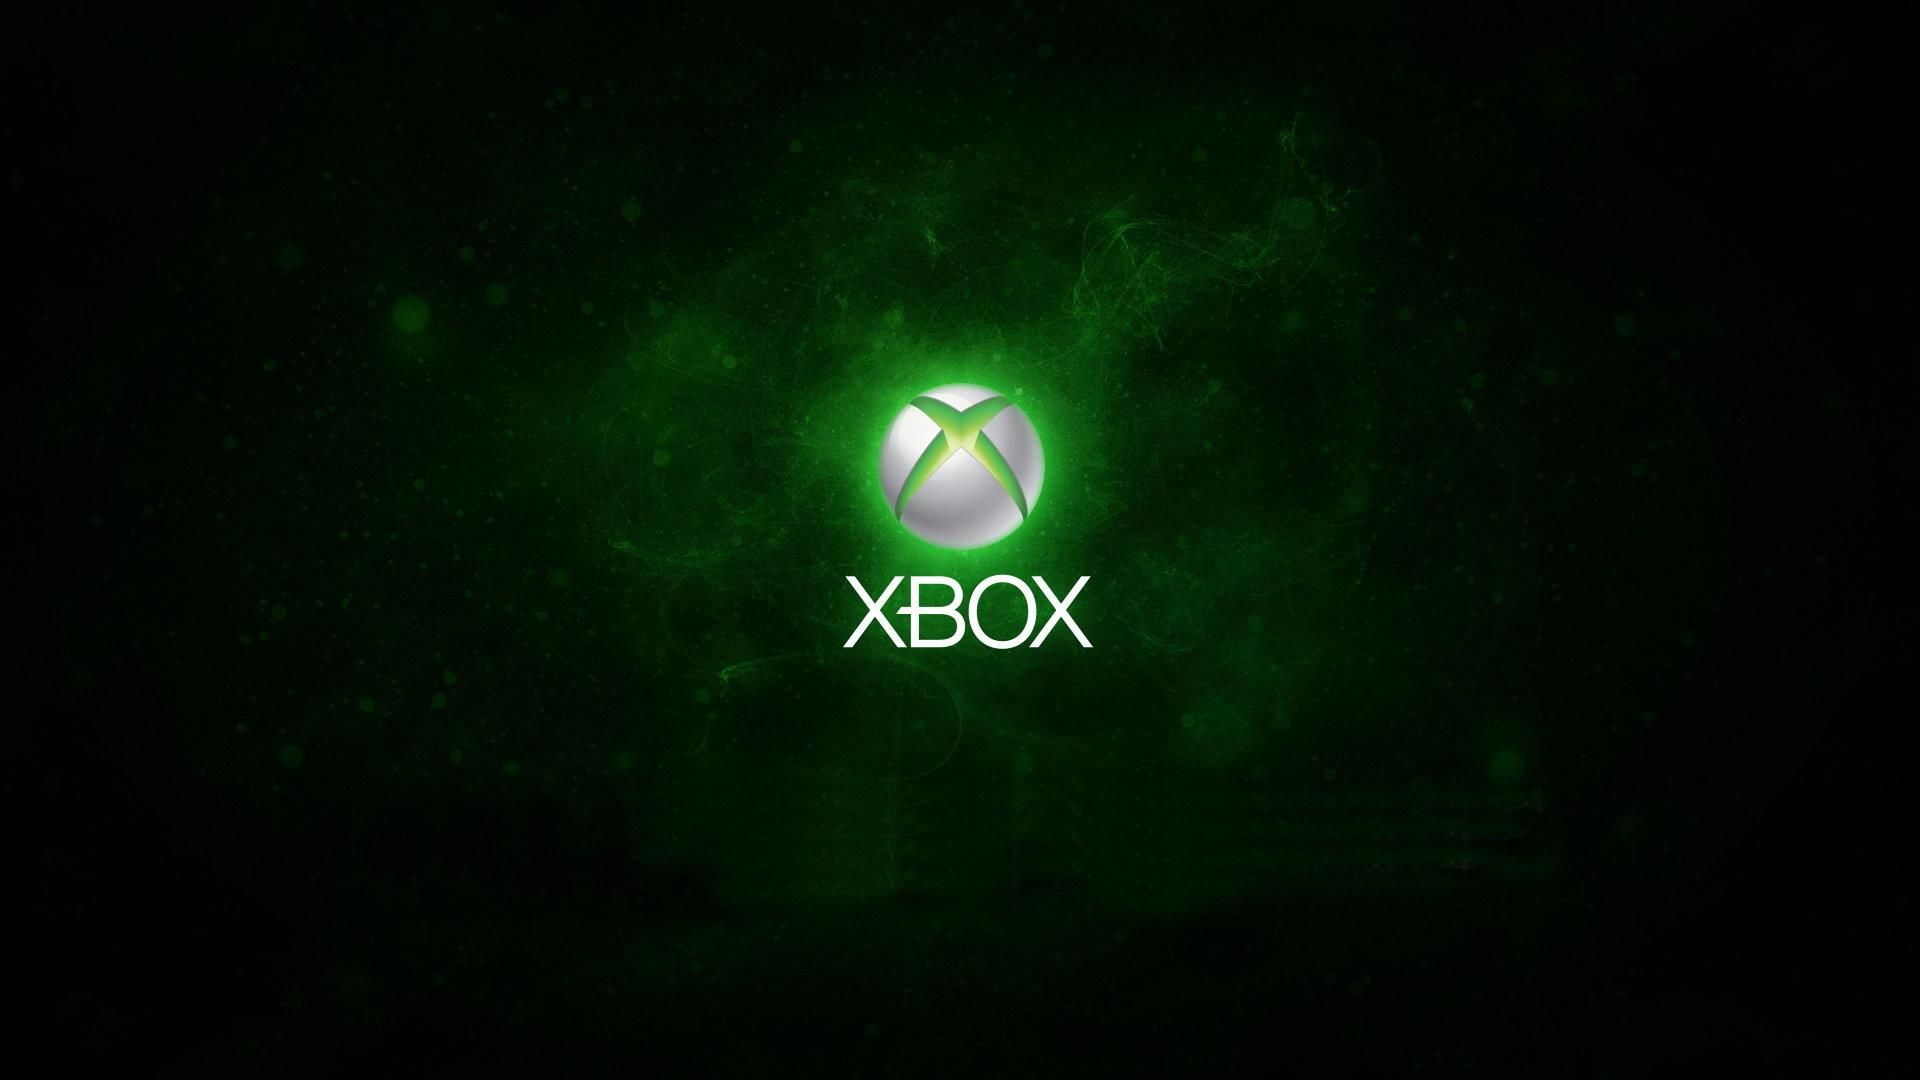 Xbox Wallpaper background picture